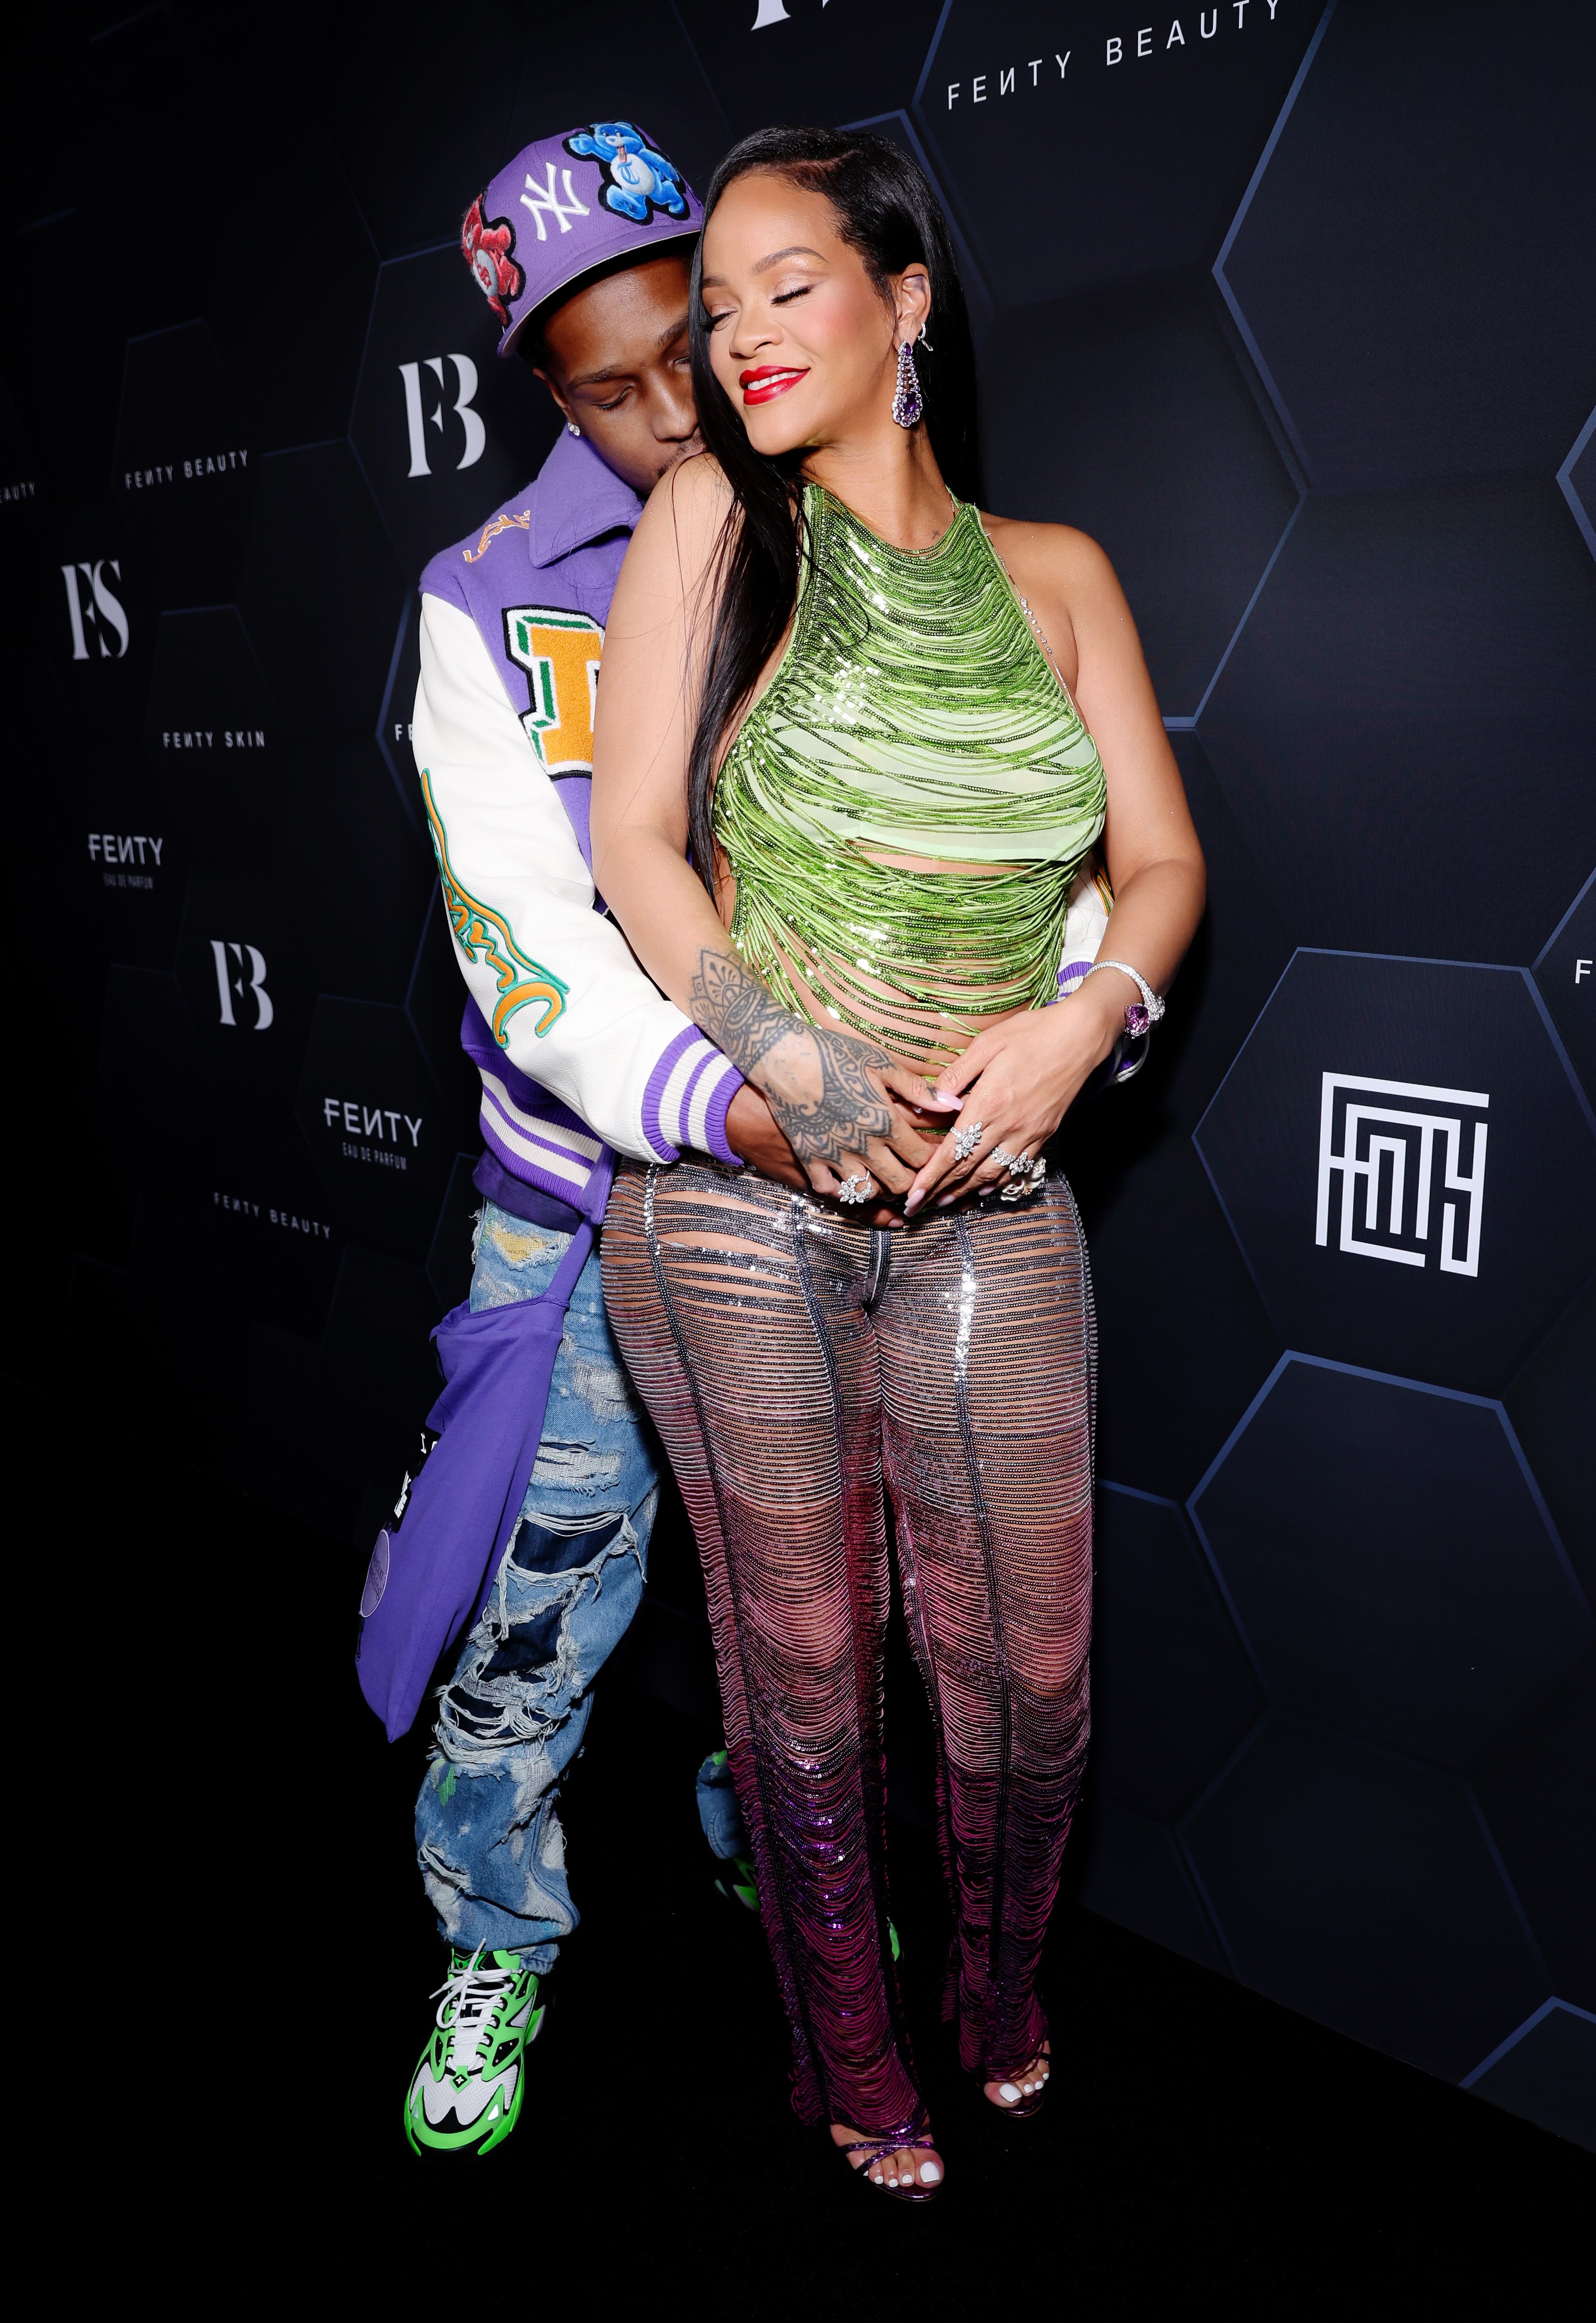 Rockstar Parents A$AP Rocky and Rihanna Coordinated Outfits in